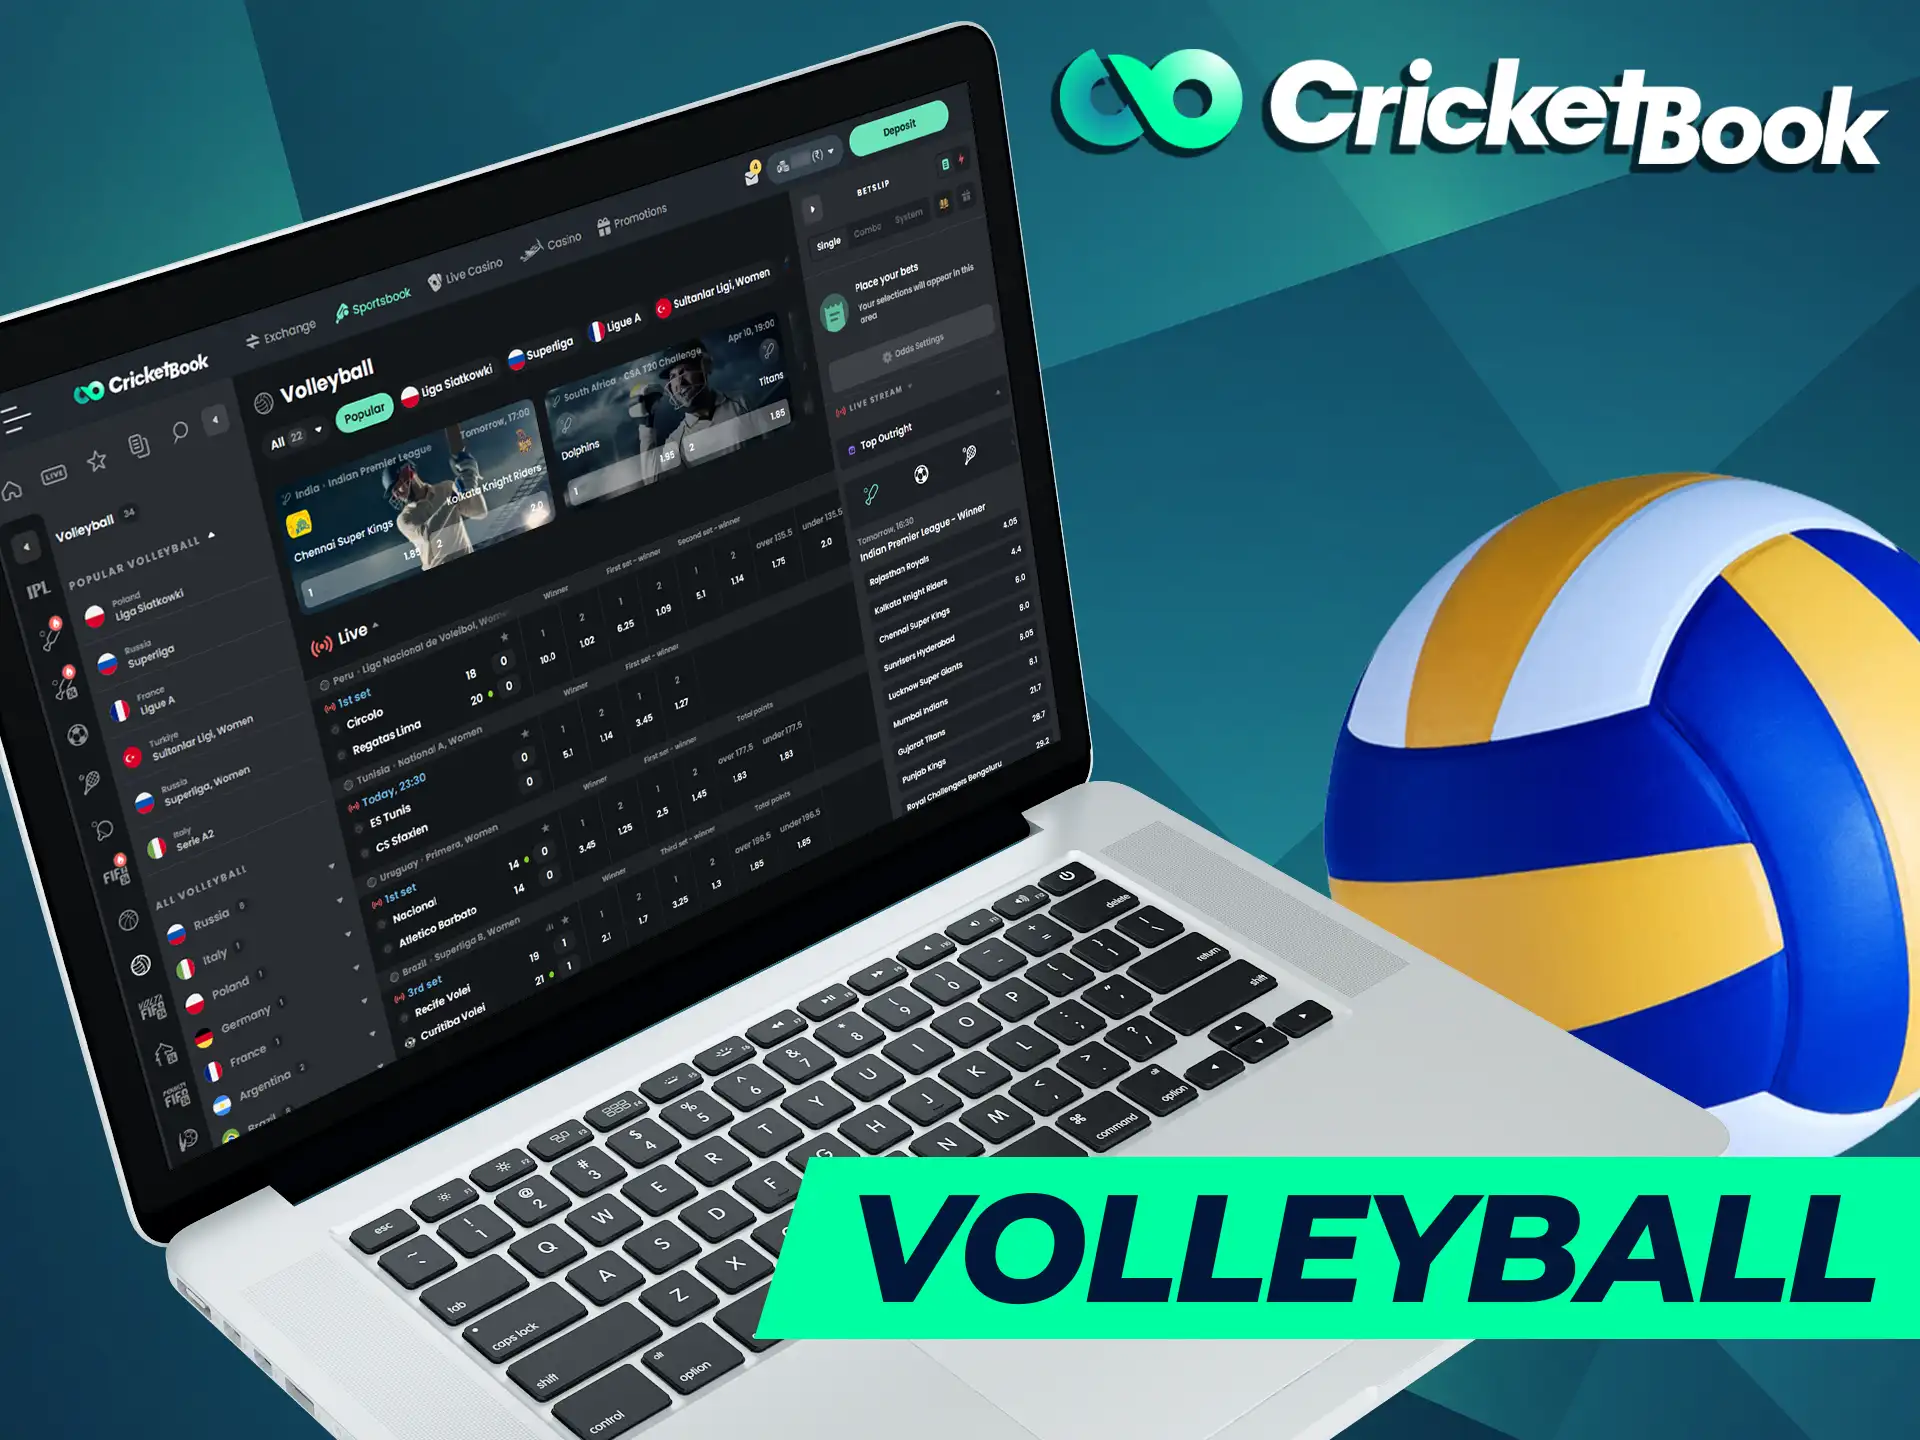 CricketBook offers Indian bettors to bet on volleyball.